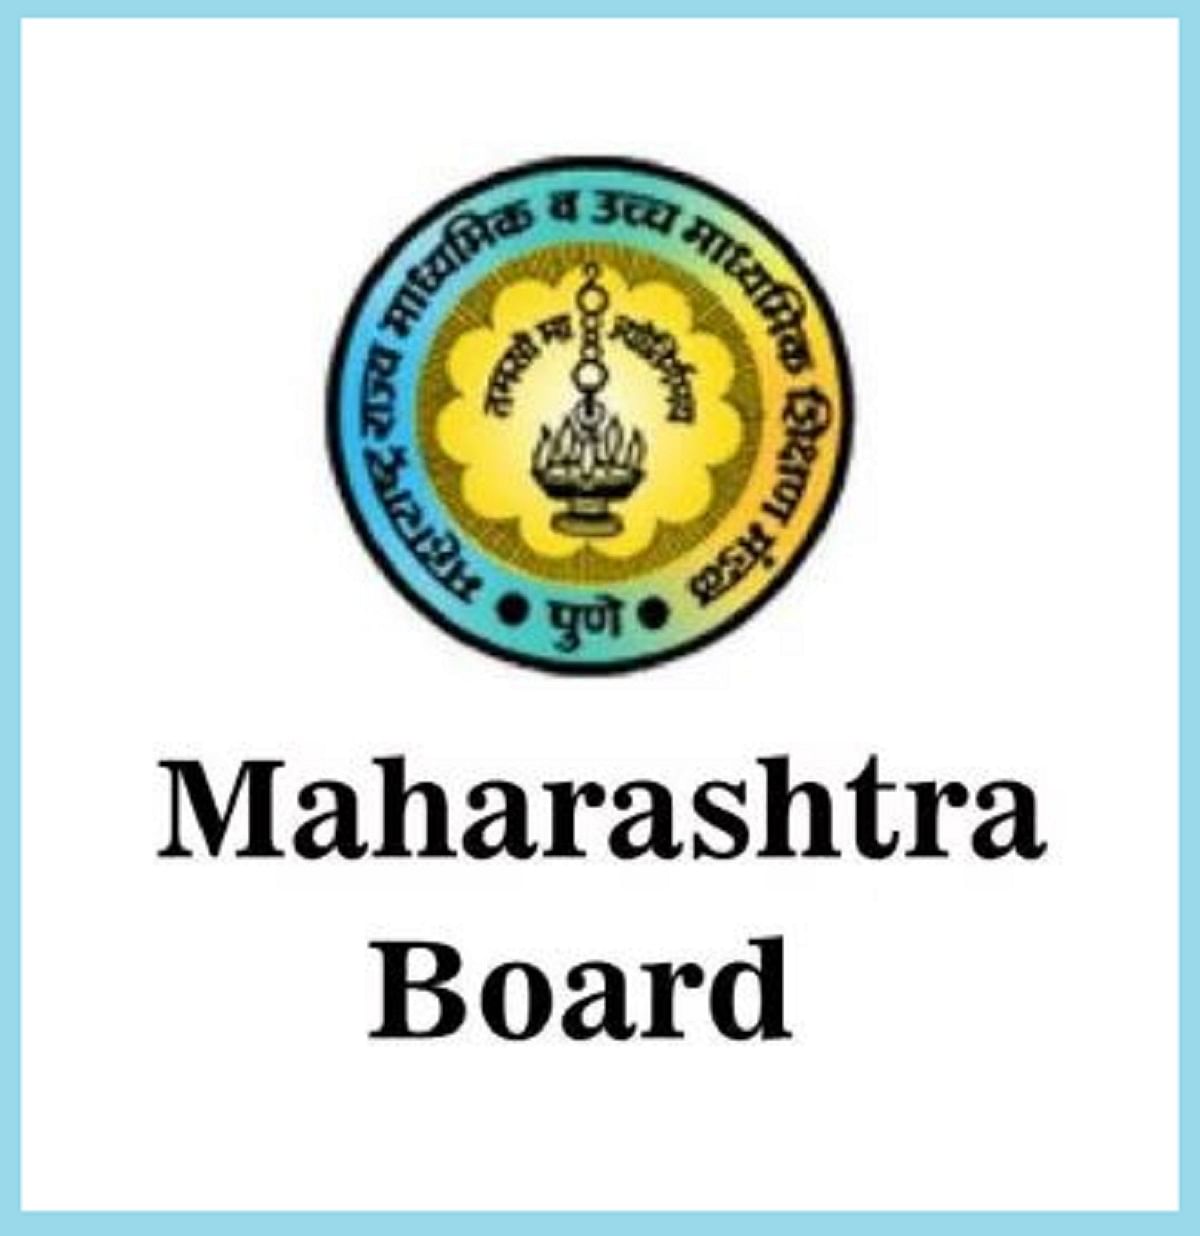 Maharashtra Board SSC (10th) Admit Card 2020 to Release Soon, Check Details